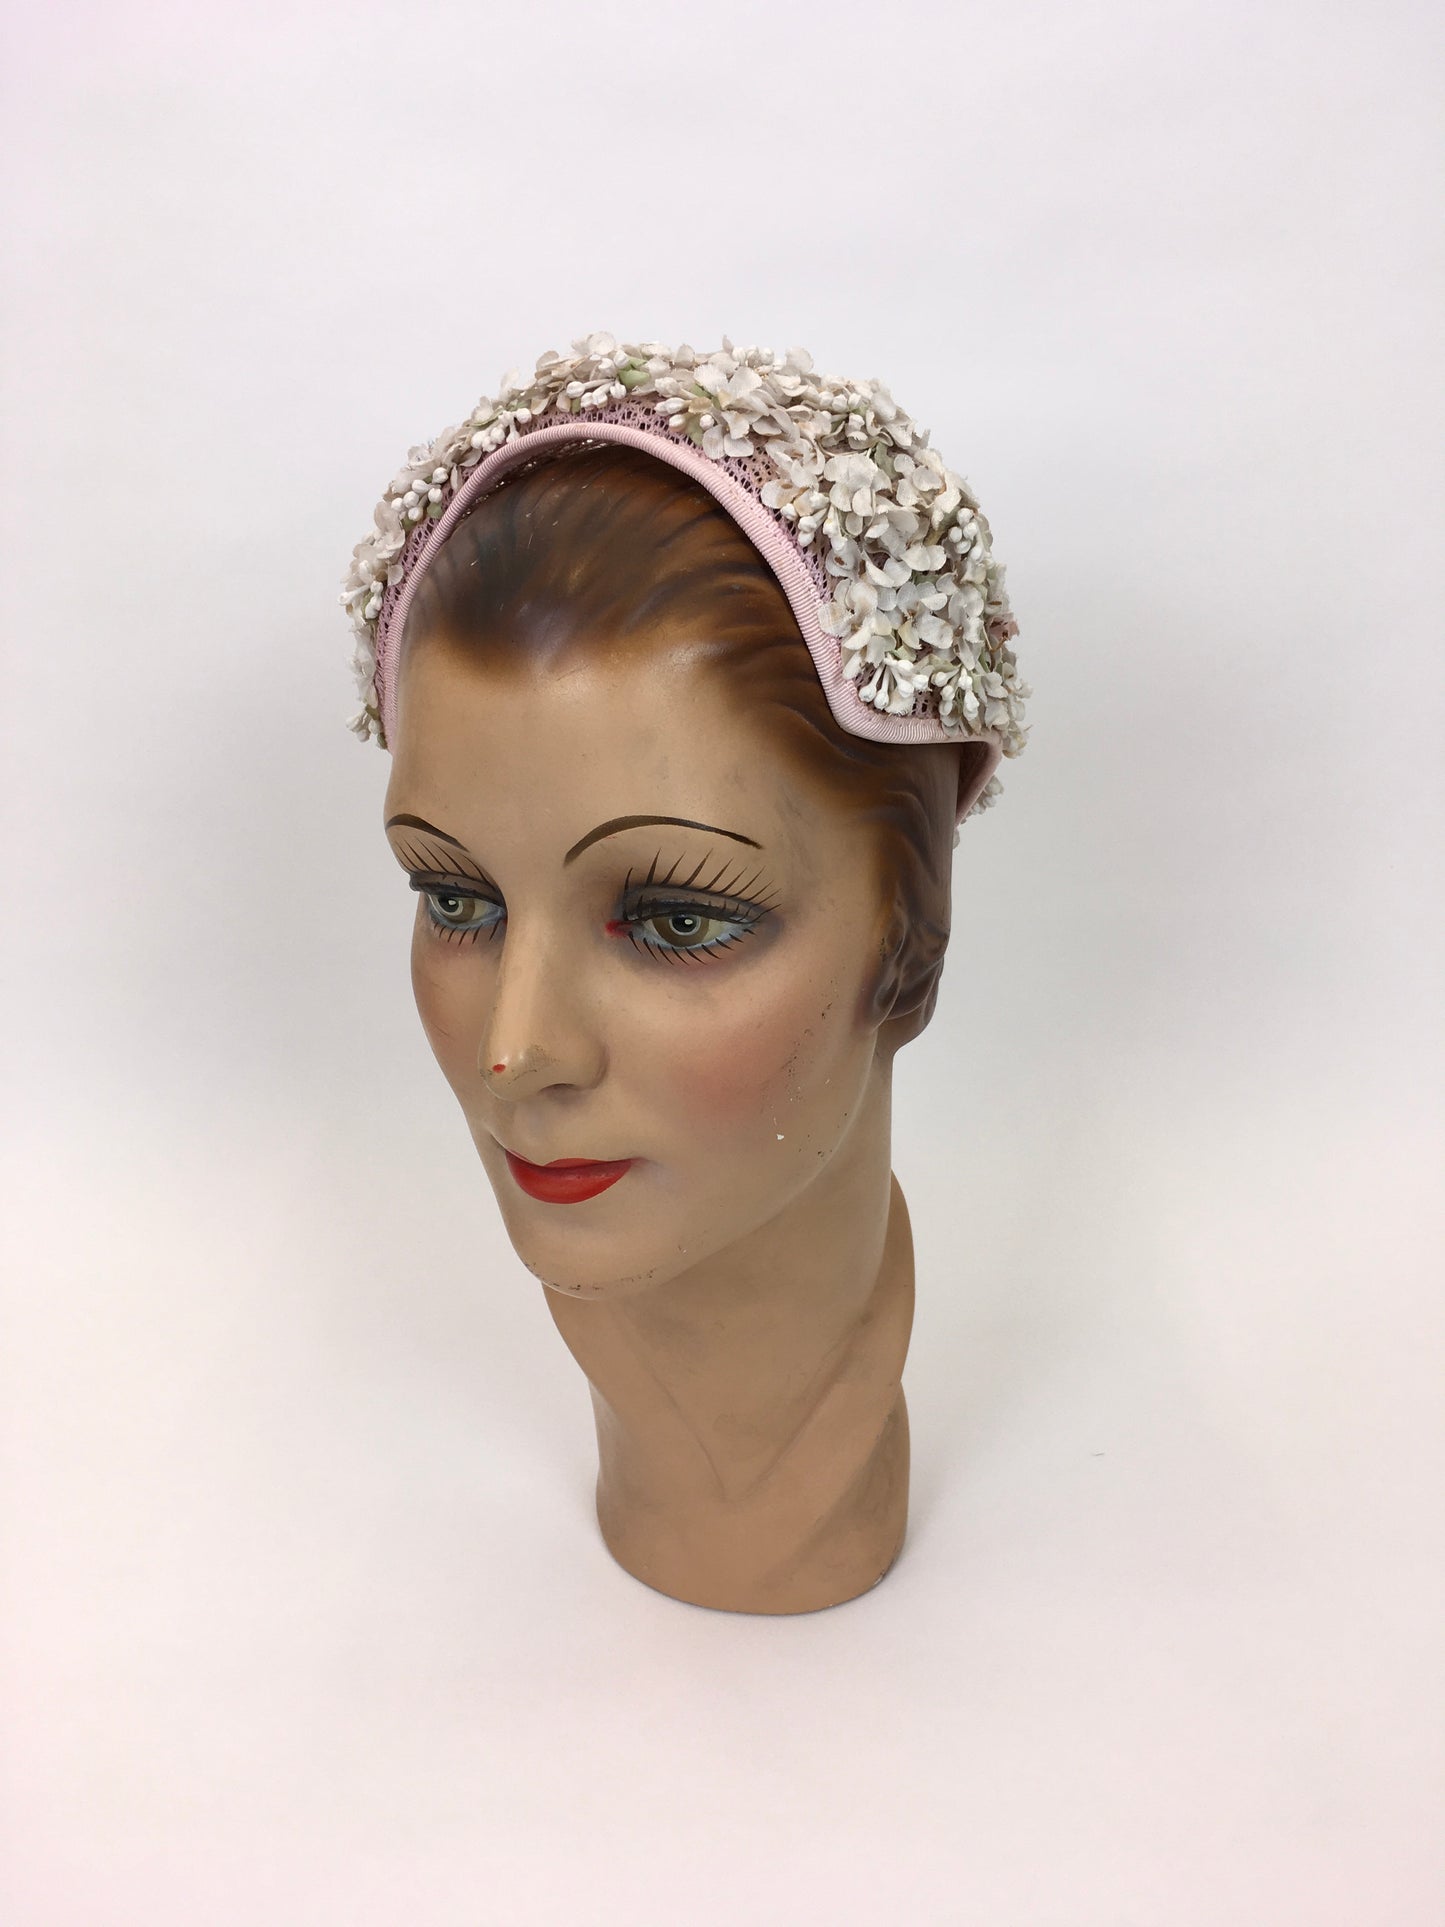 Original 1950s Darling ‘ Marten’ Hat - Made in A Dusky Pink with Ivory Florals and Soft Green Leaves